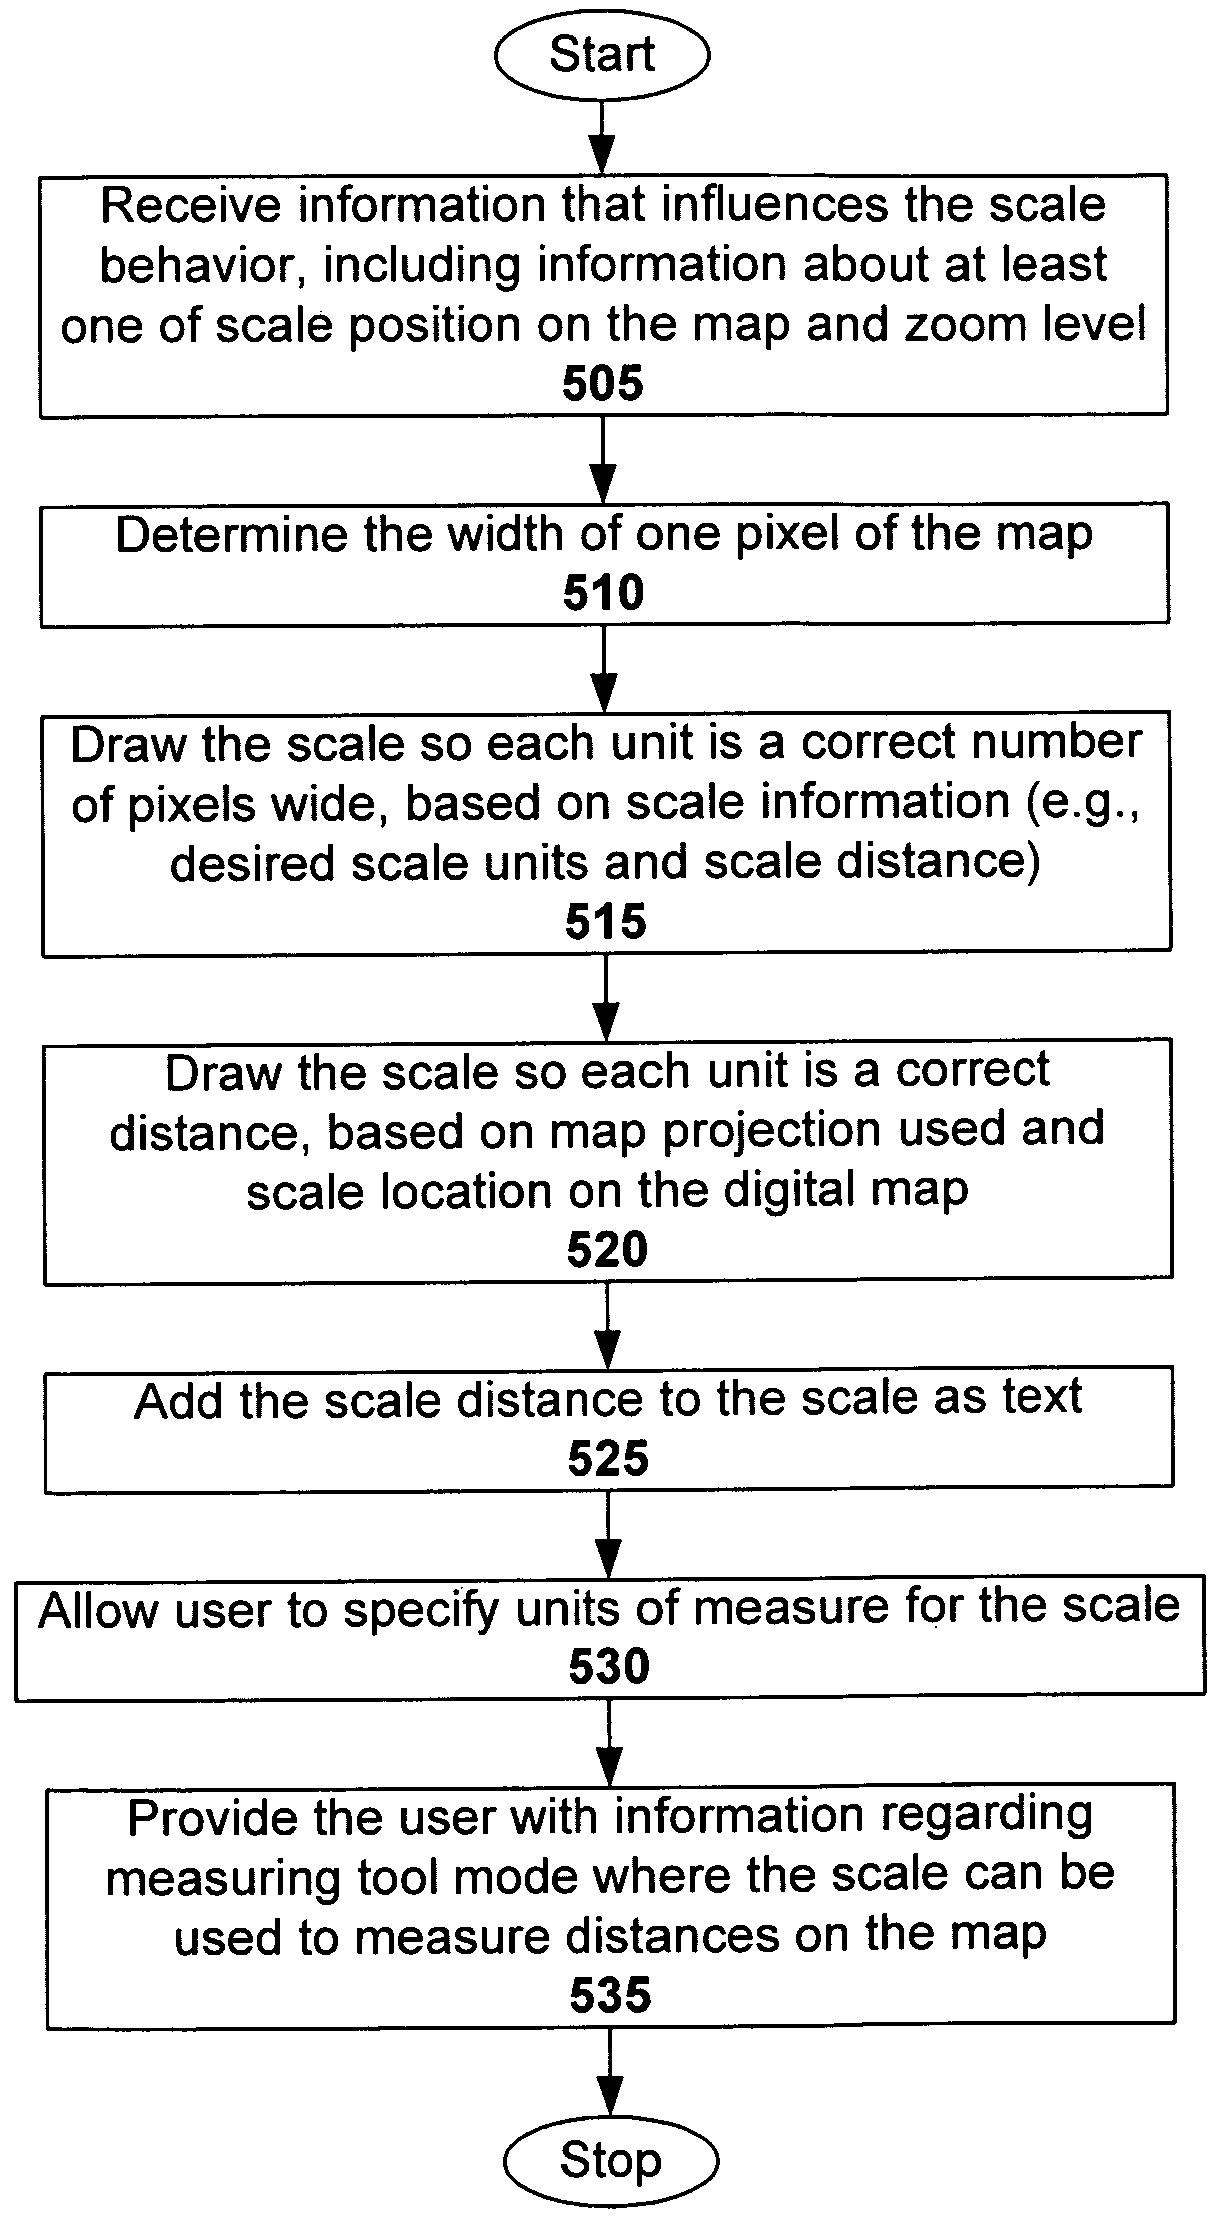 Combined map scale and measuring tool